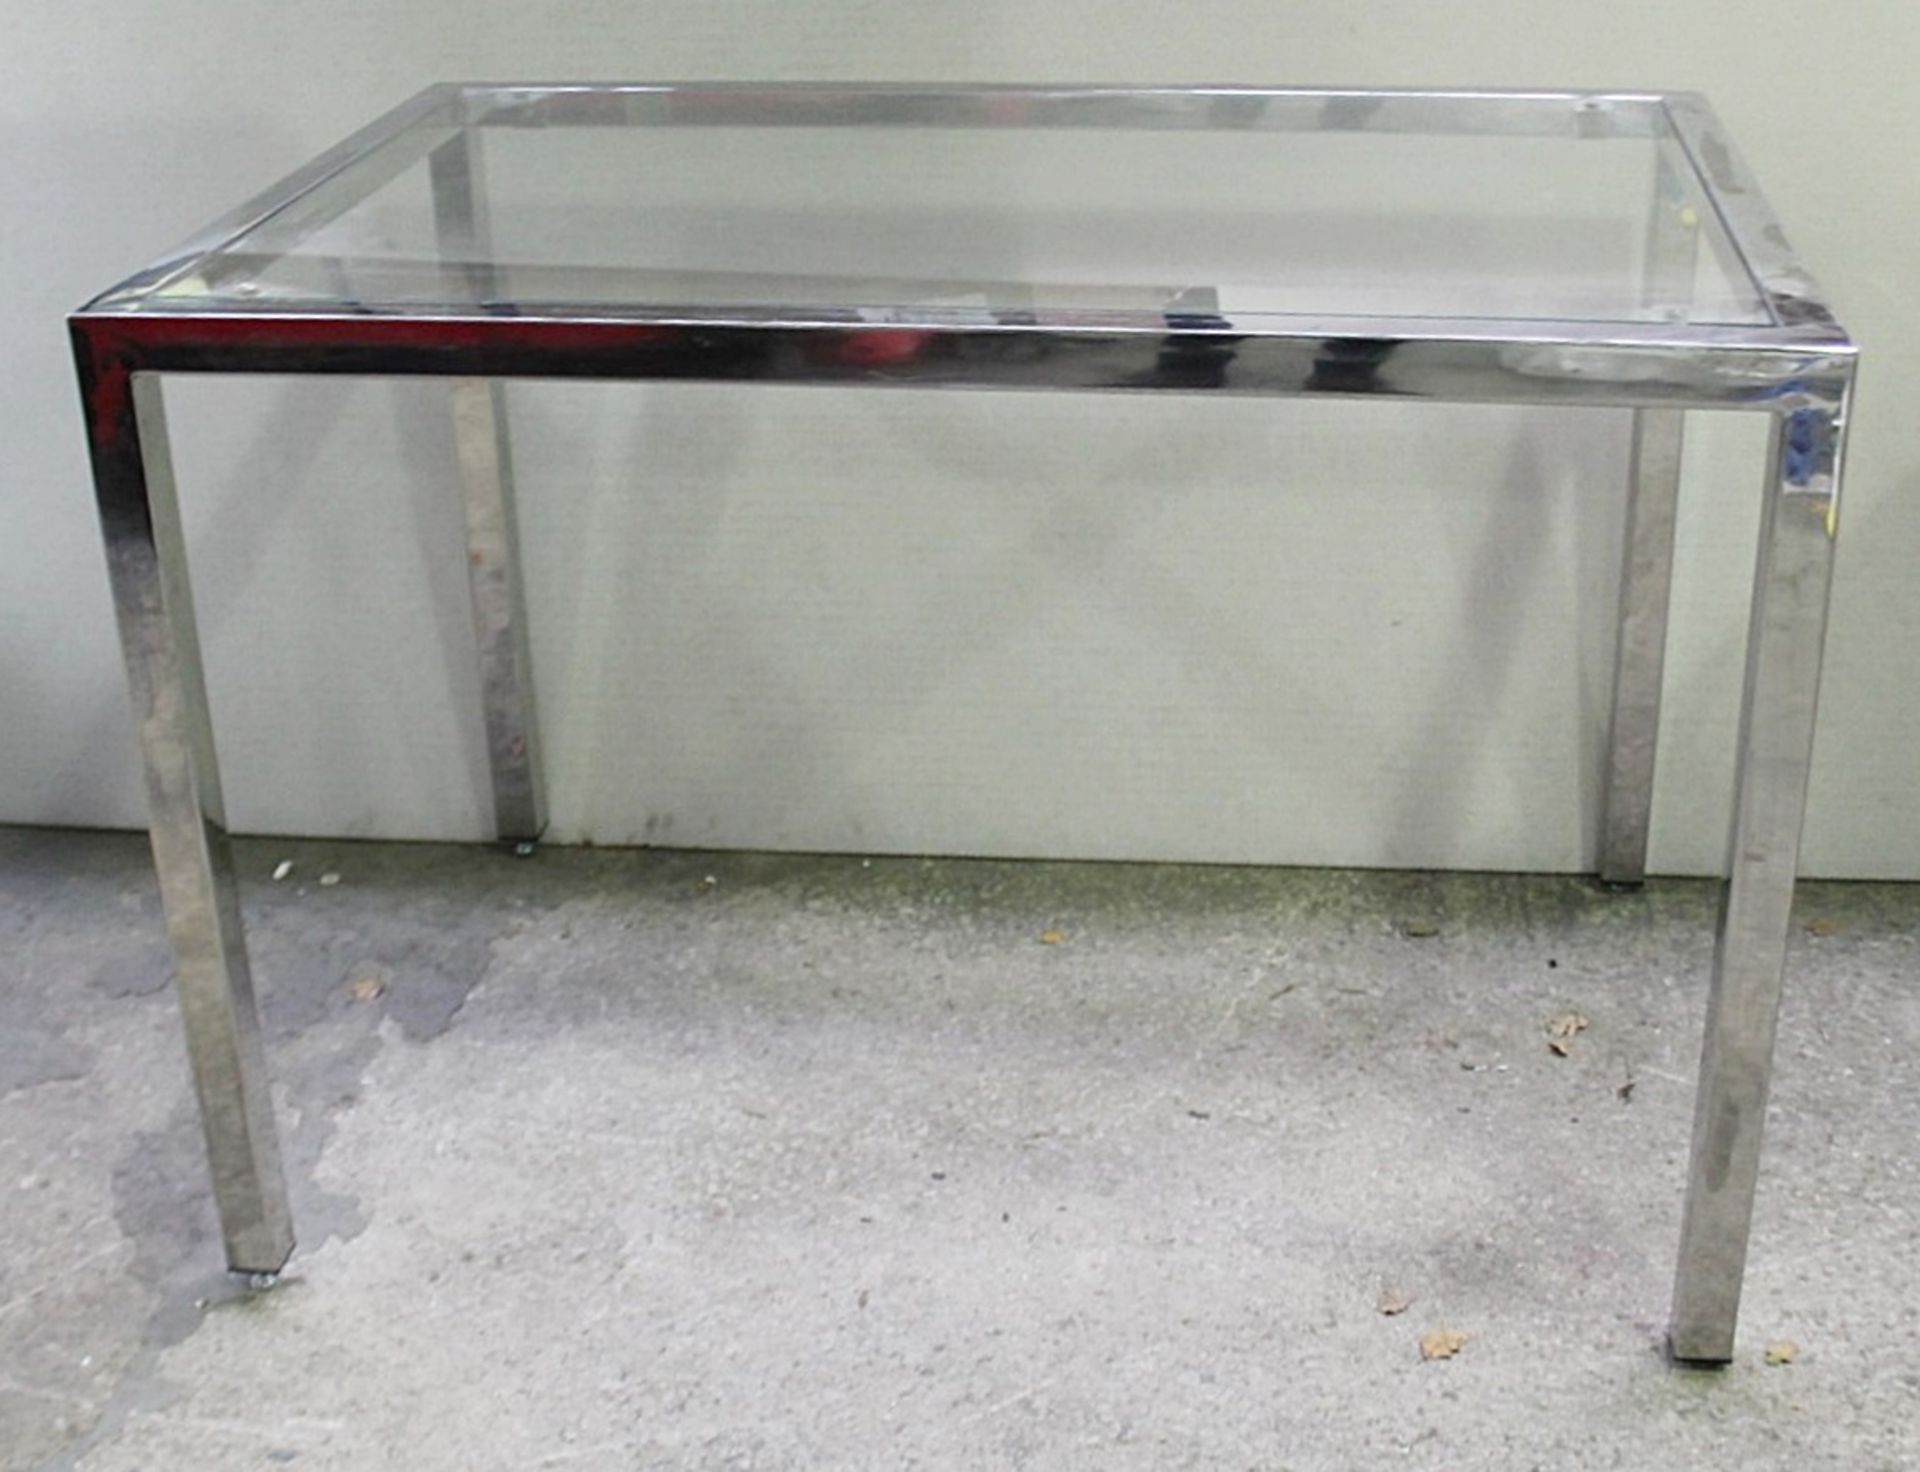 1 x Large Display Table In Glass And Chrome - Dimensions: H91 x W135 x D90cm - Ex-Showroom Piece - - Image 5 of 6